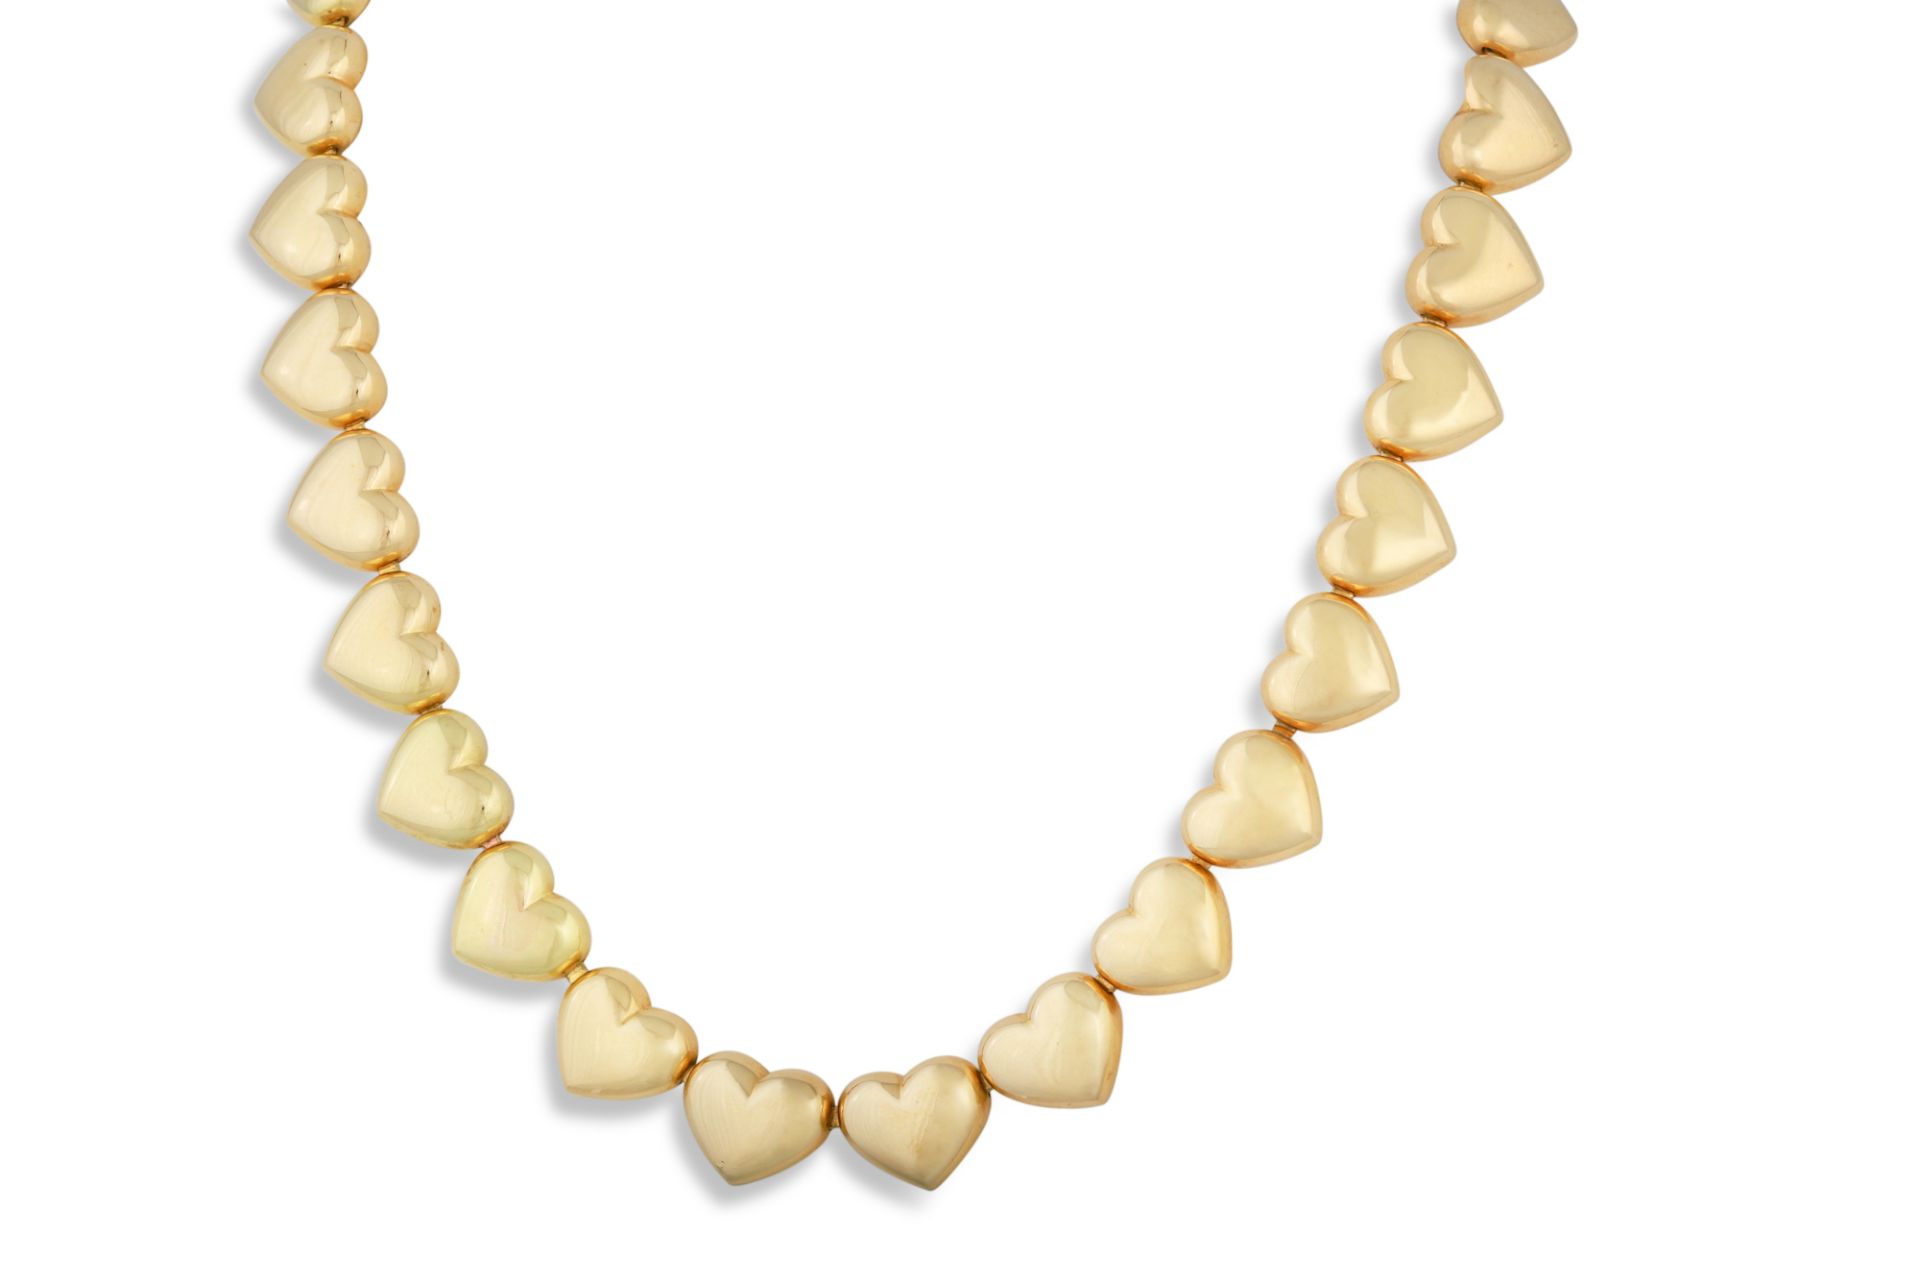 A MAUBOUSSIN NECKLACE, in 18ct yellow gold, each link formed as a heart shaped panel, signed